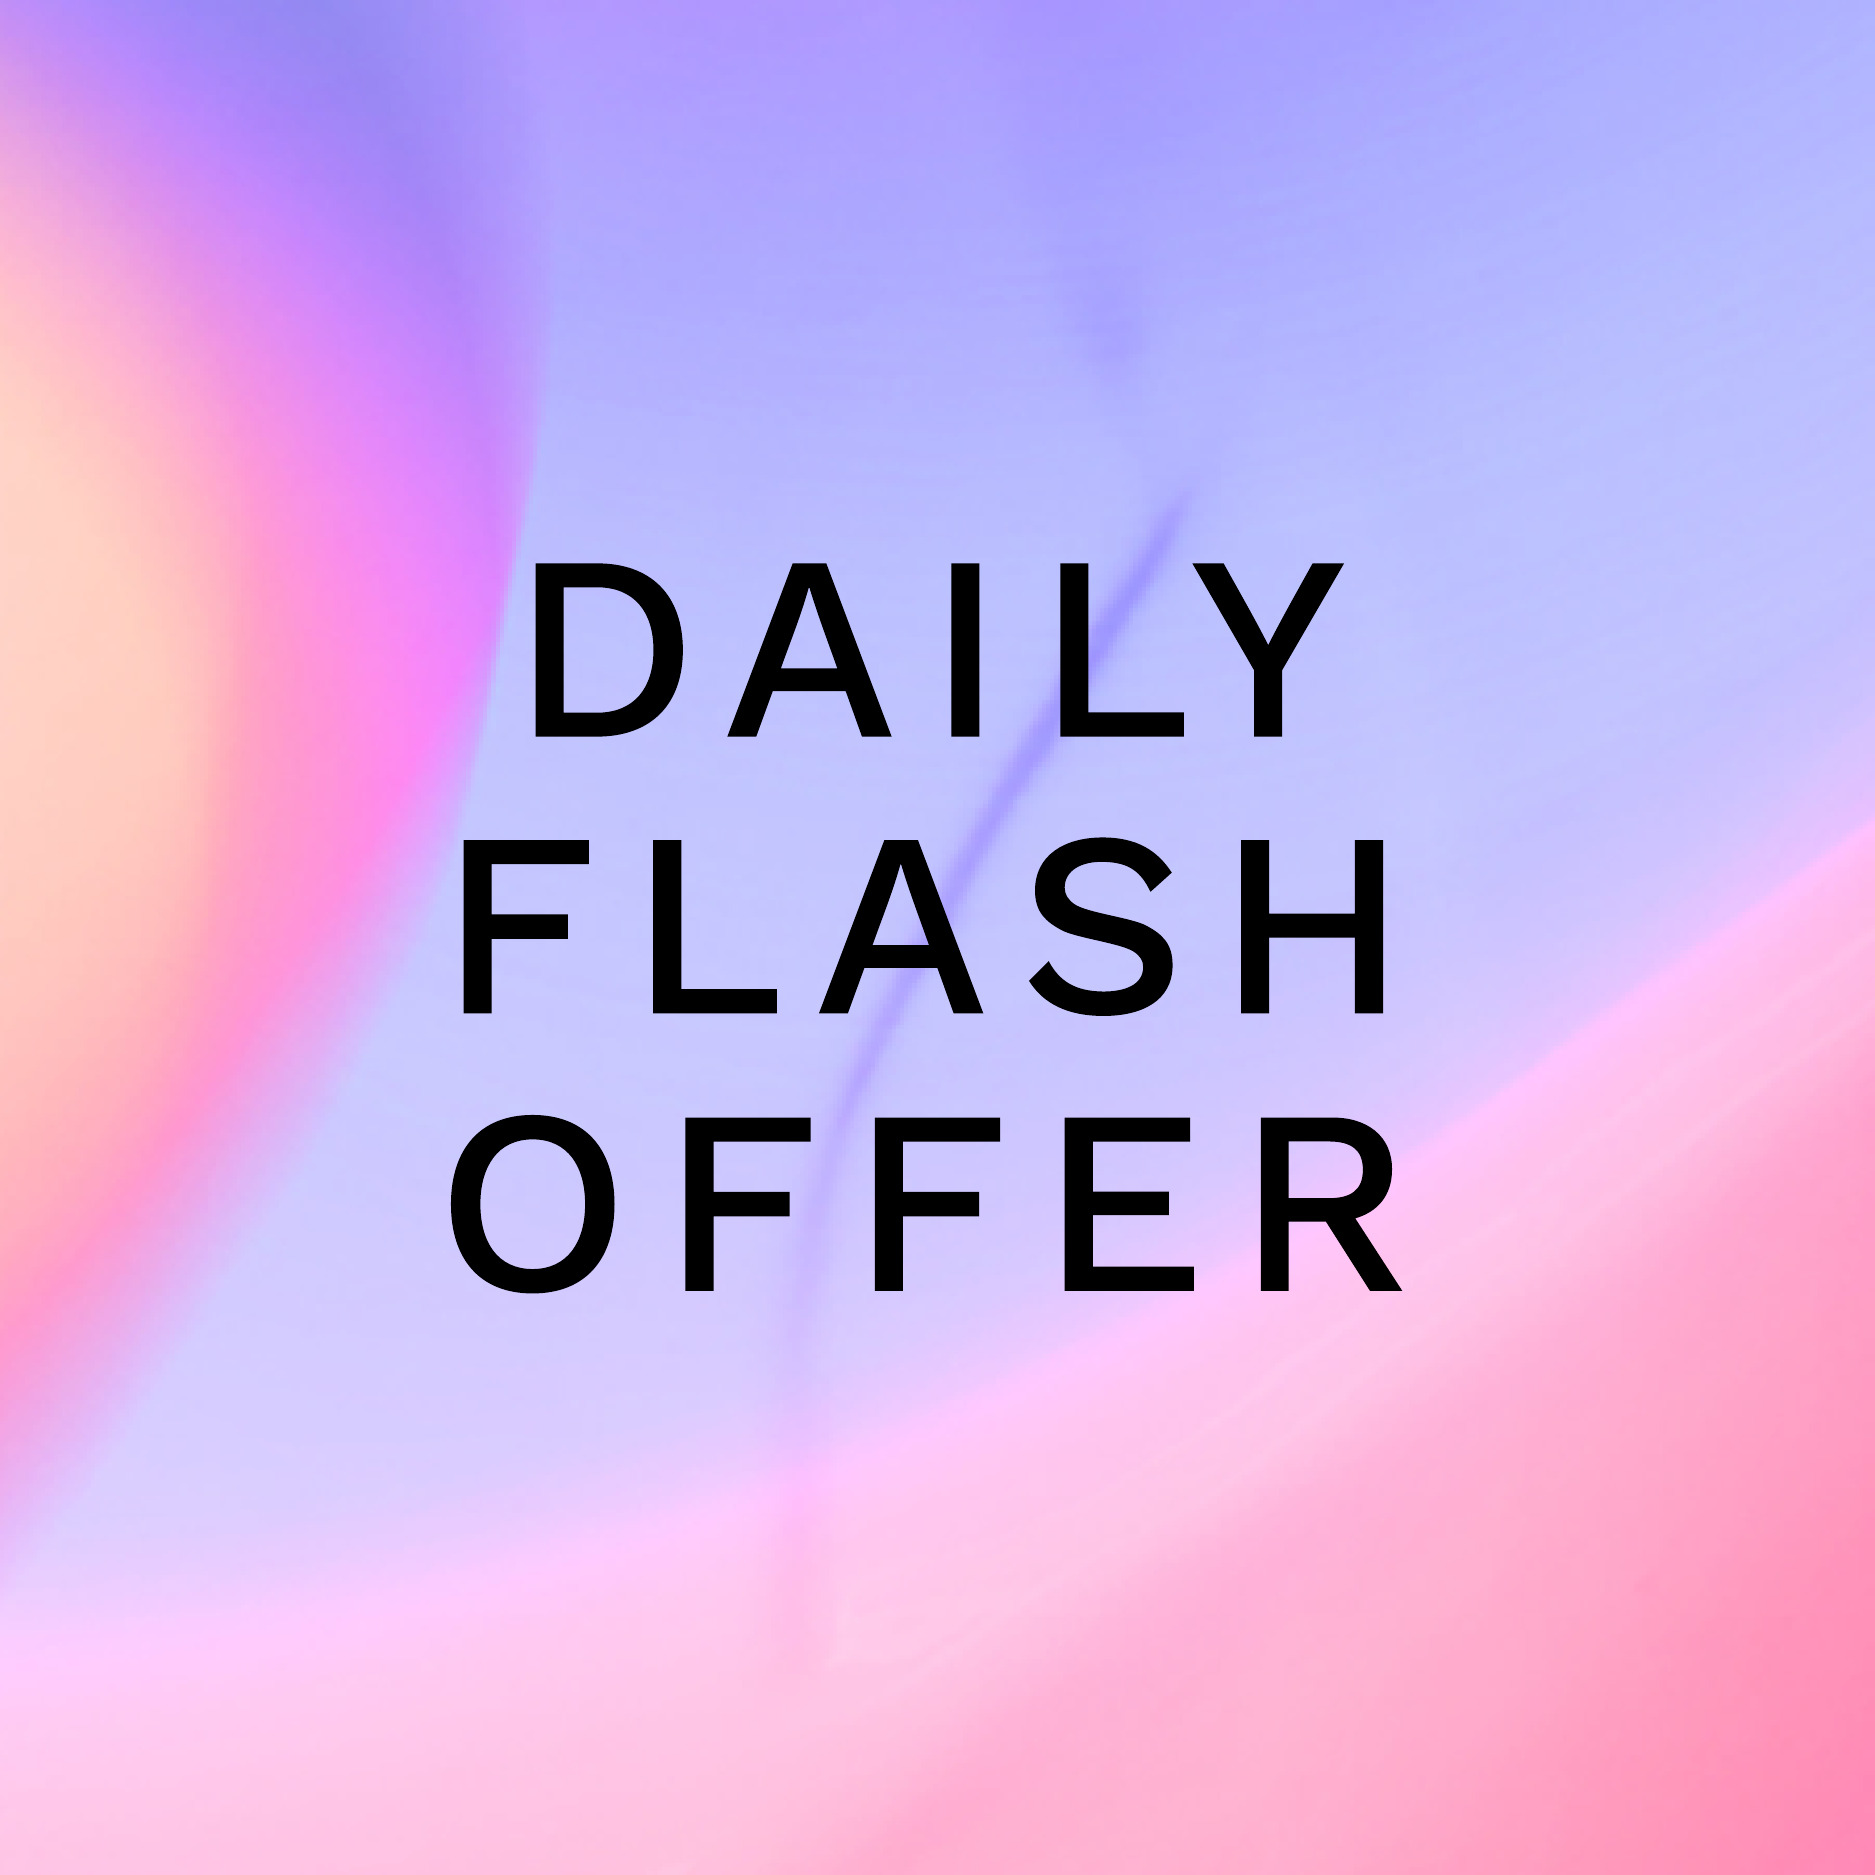 DAILY FLASH OFFER 30 PERCENT OFF SEXUAL WELLNESS